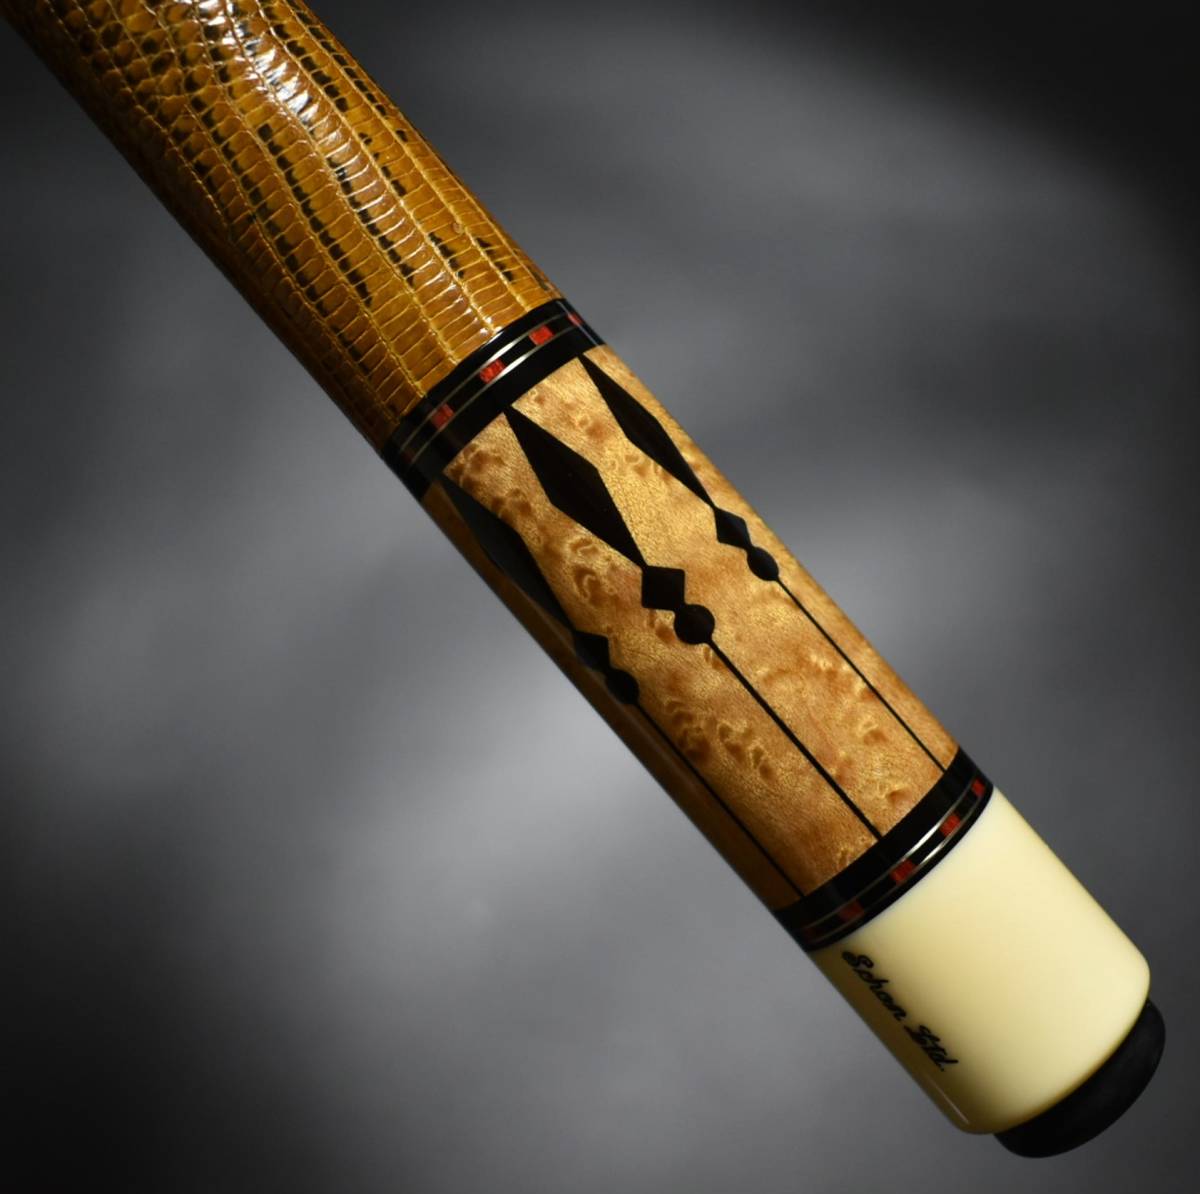  as good as new *Schon Custom Cues*LTD* finest quality Lizard original leather Sean joint protector attached 